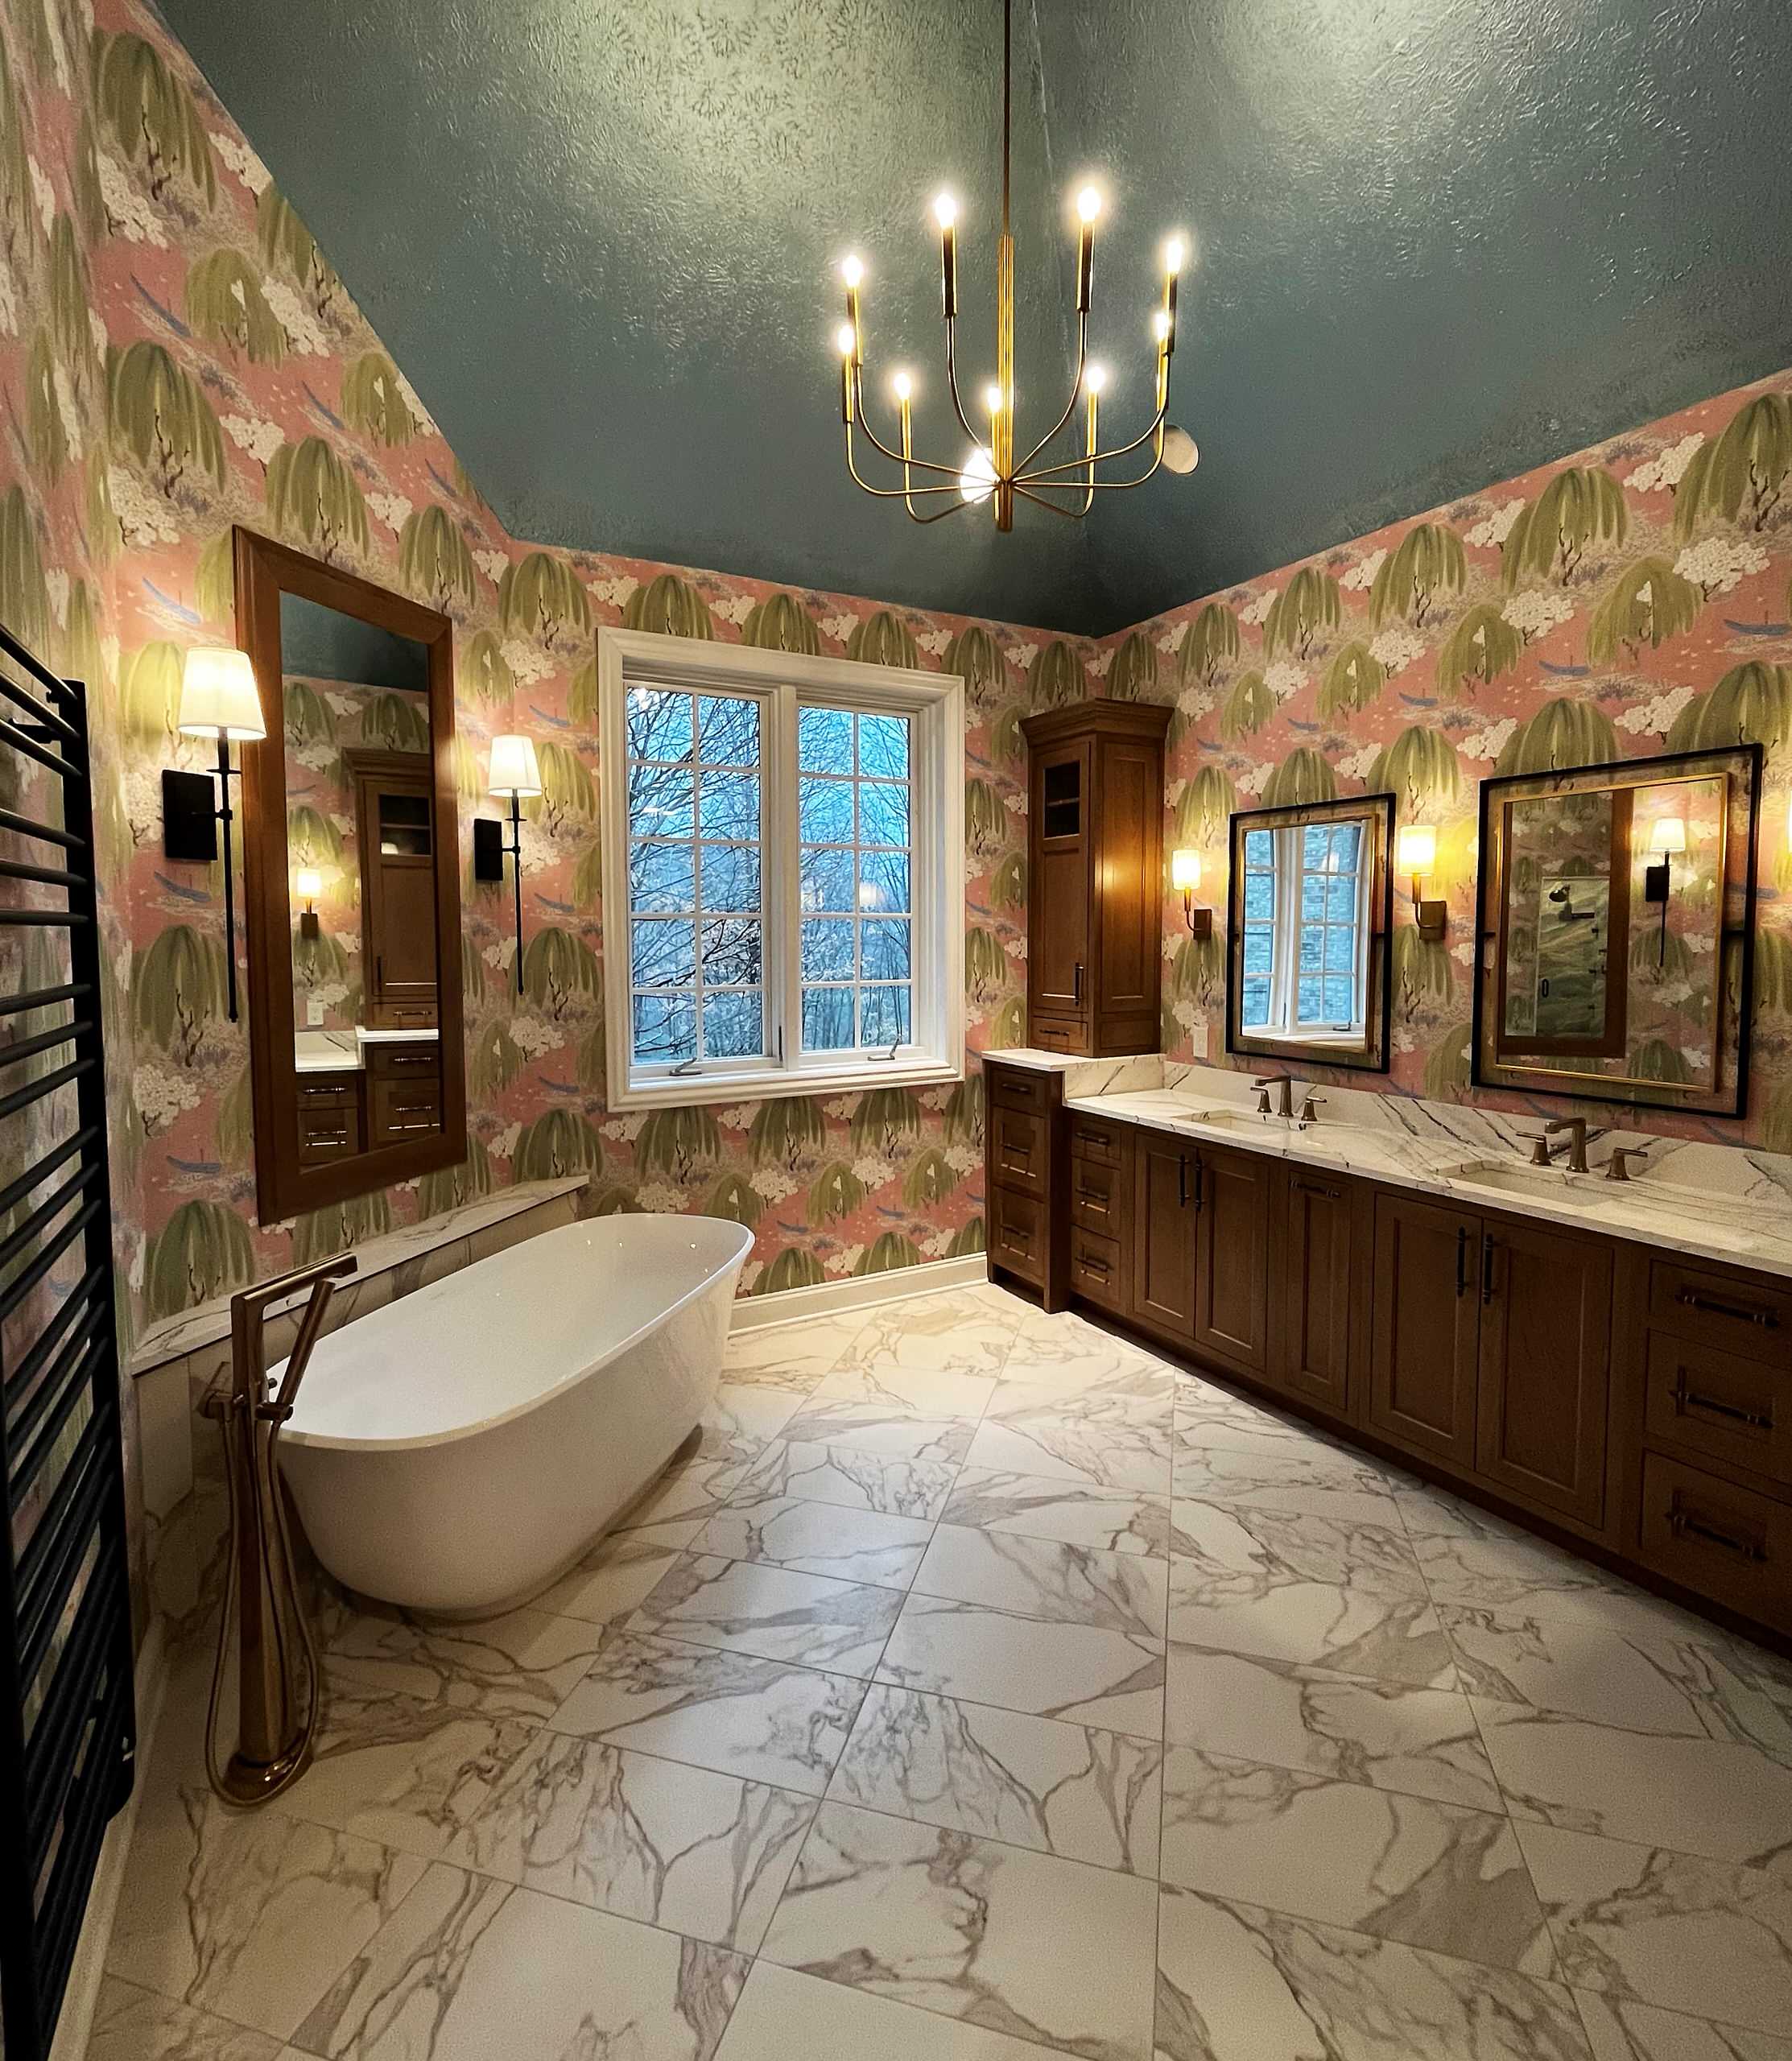 Royal treatment - One-of-a-kind Primary Bathroom renovation!